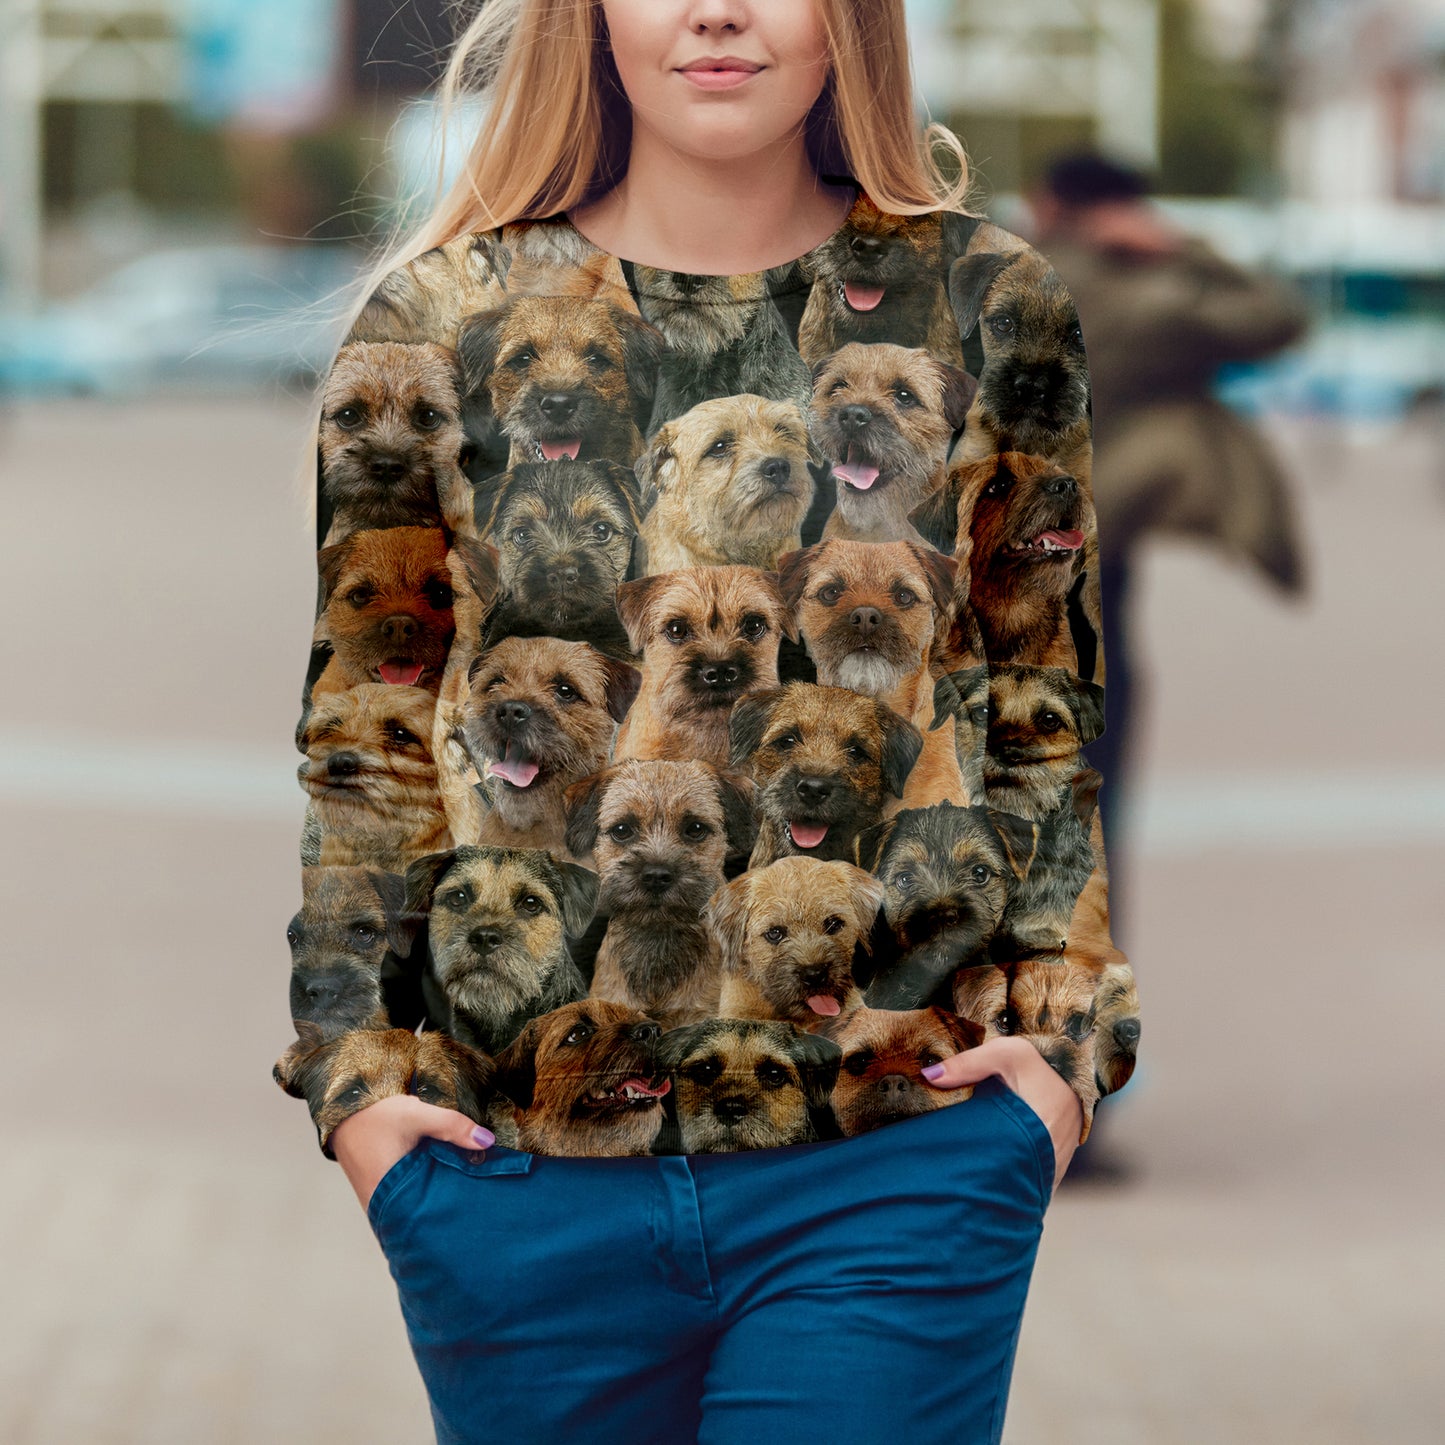 You Will Have A Bunch Of Border Terriers - Sweatshirt V1